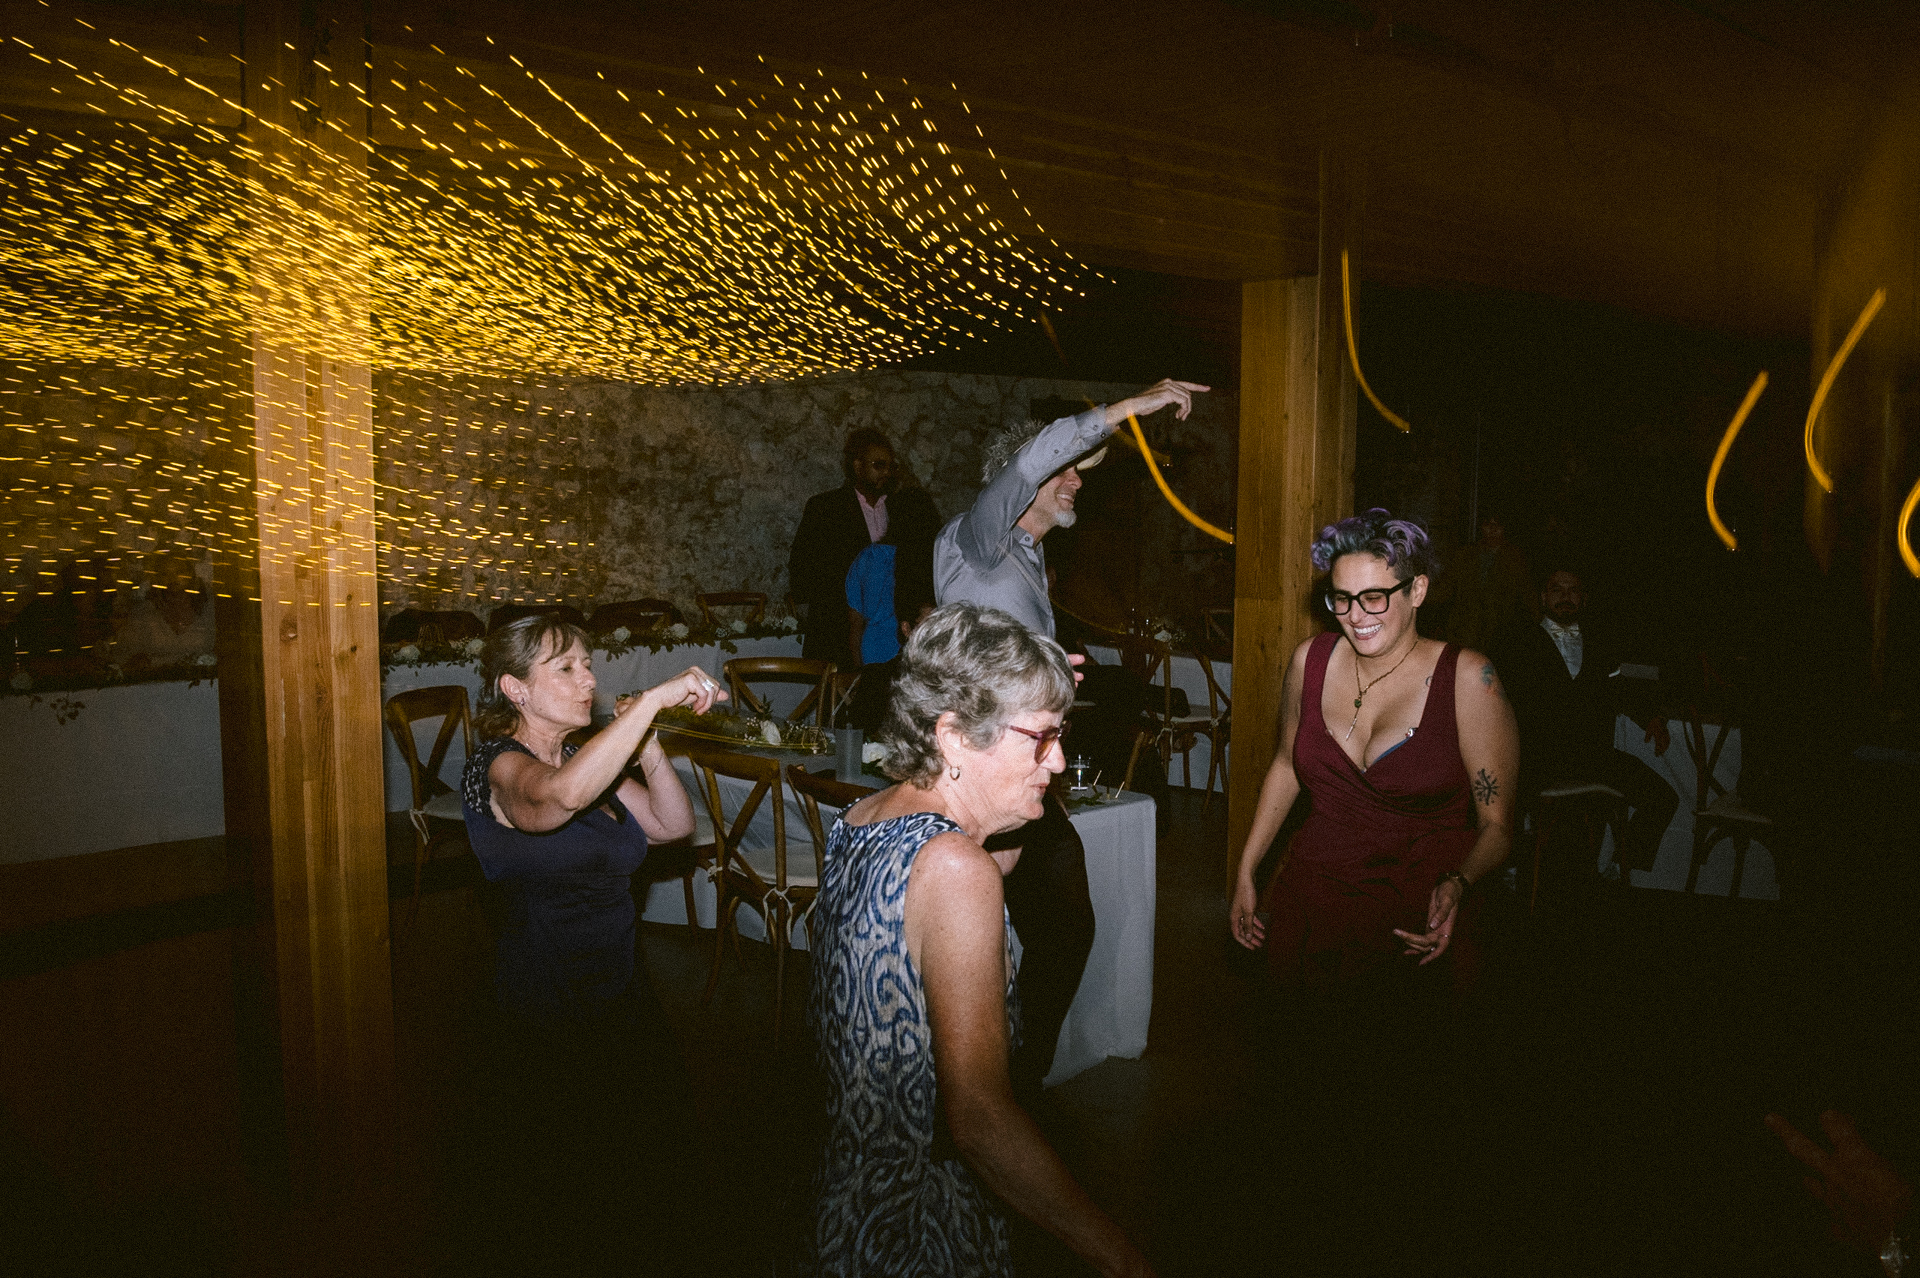 Guests dance joyfully at the dance floor with beautiful hanging light as a backdrop.